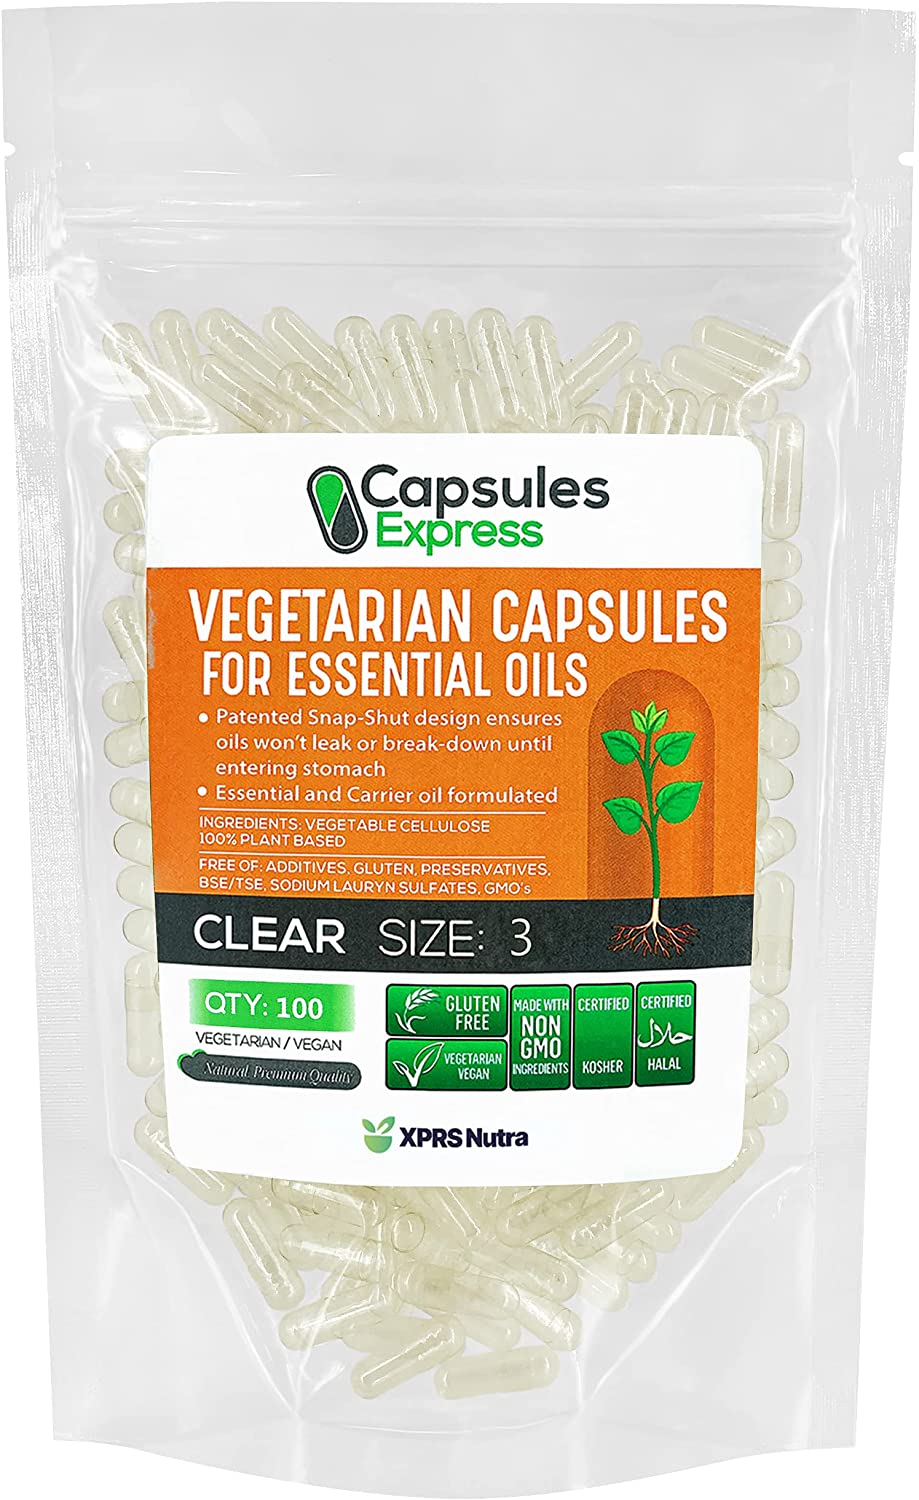 Size 3 Clear Empty Vegan Capsules for Essential Oils